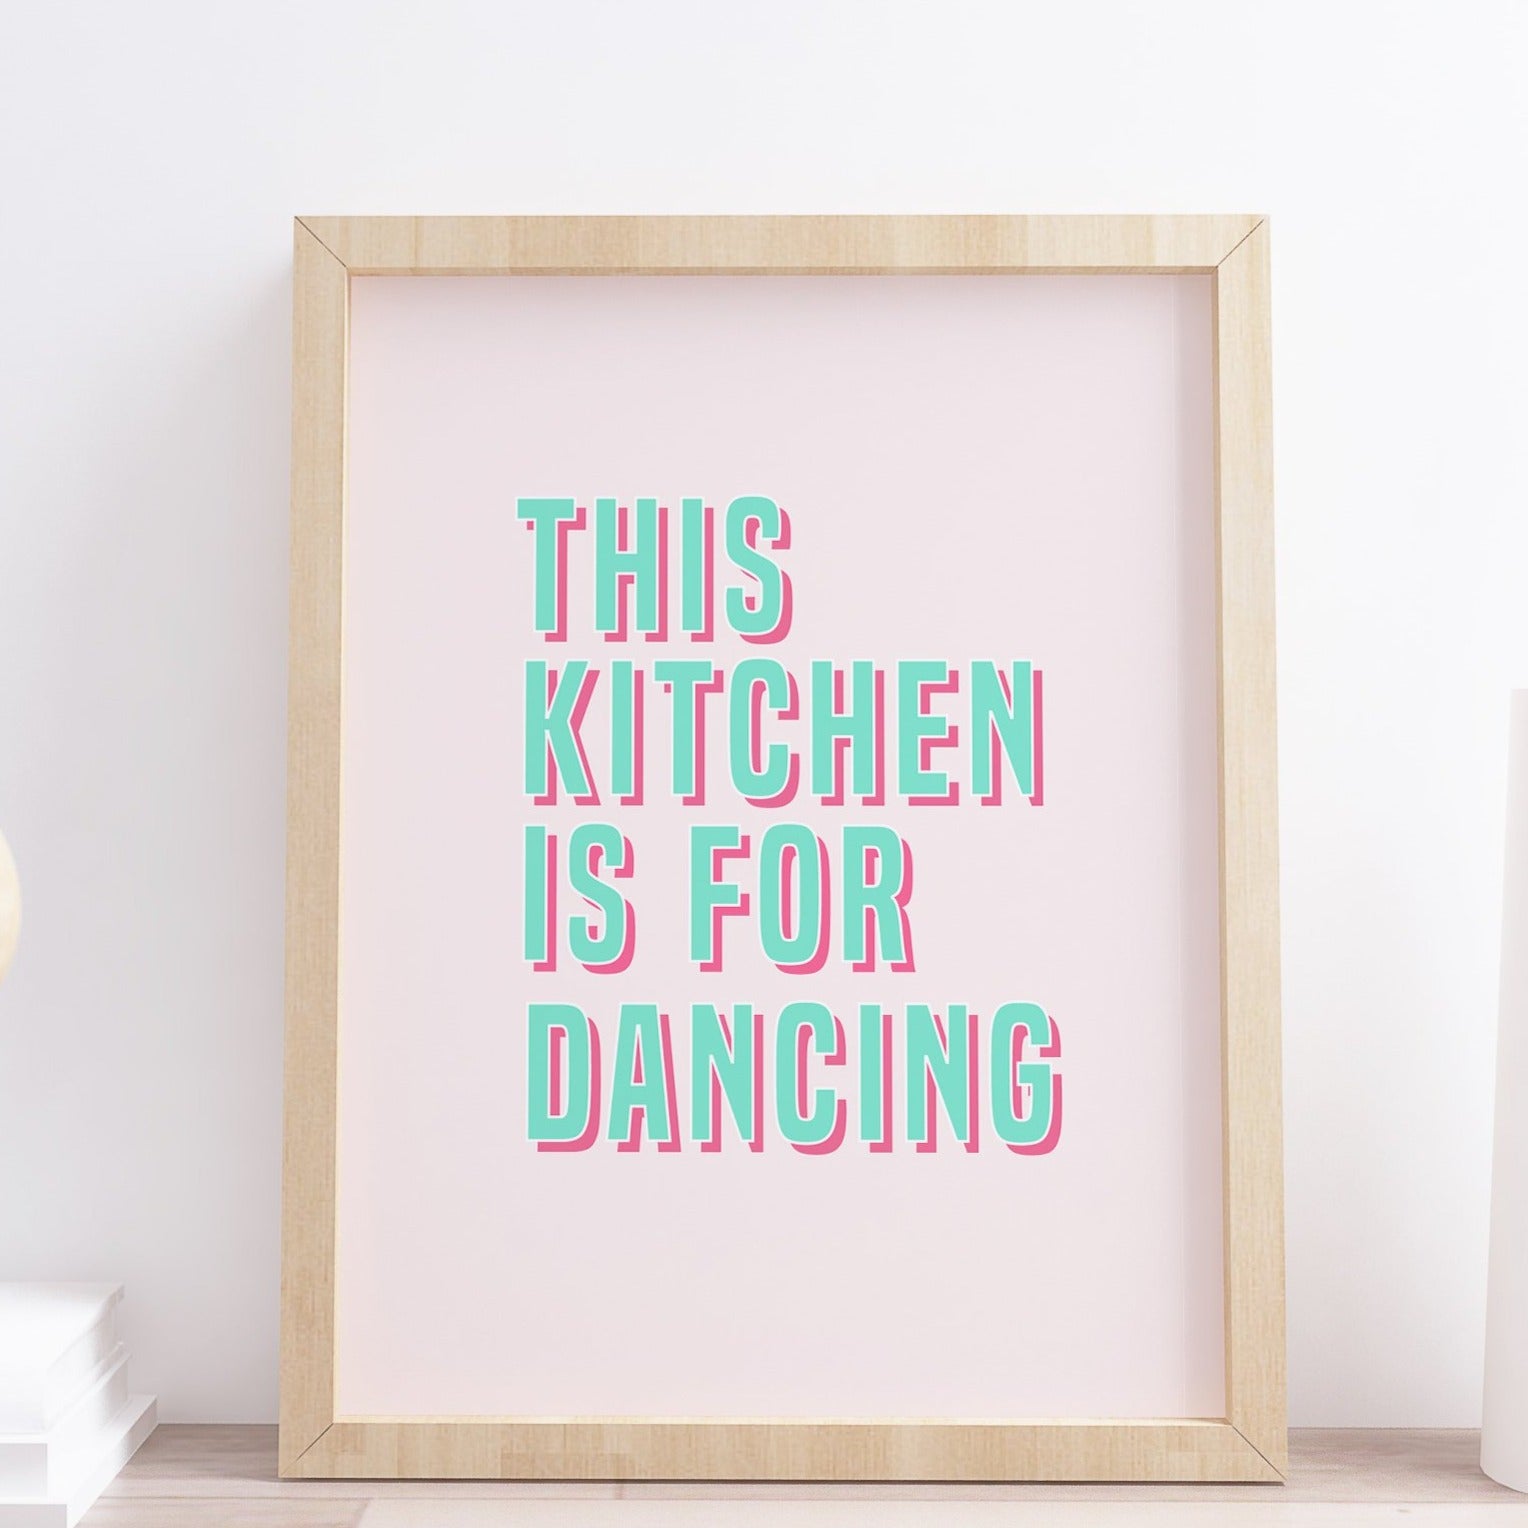 This Kitchen is for dancing typography print